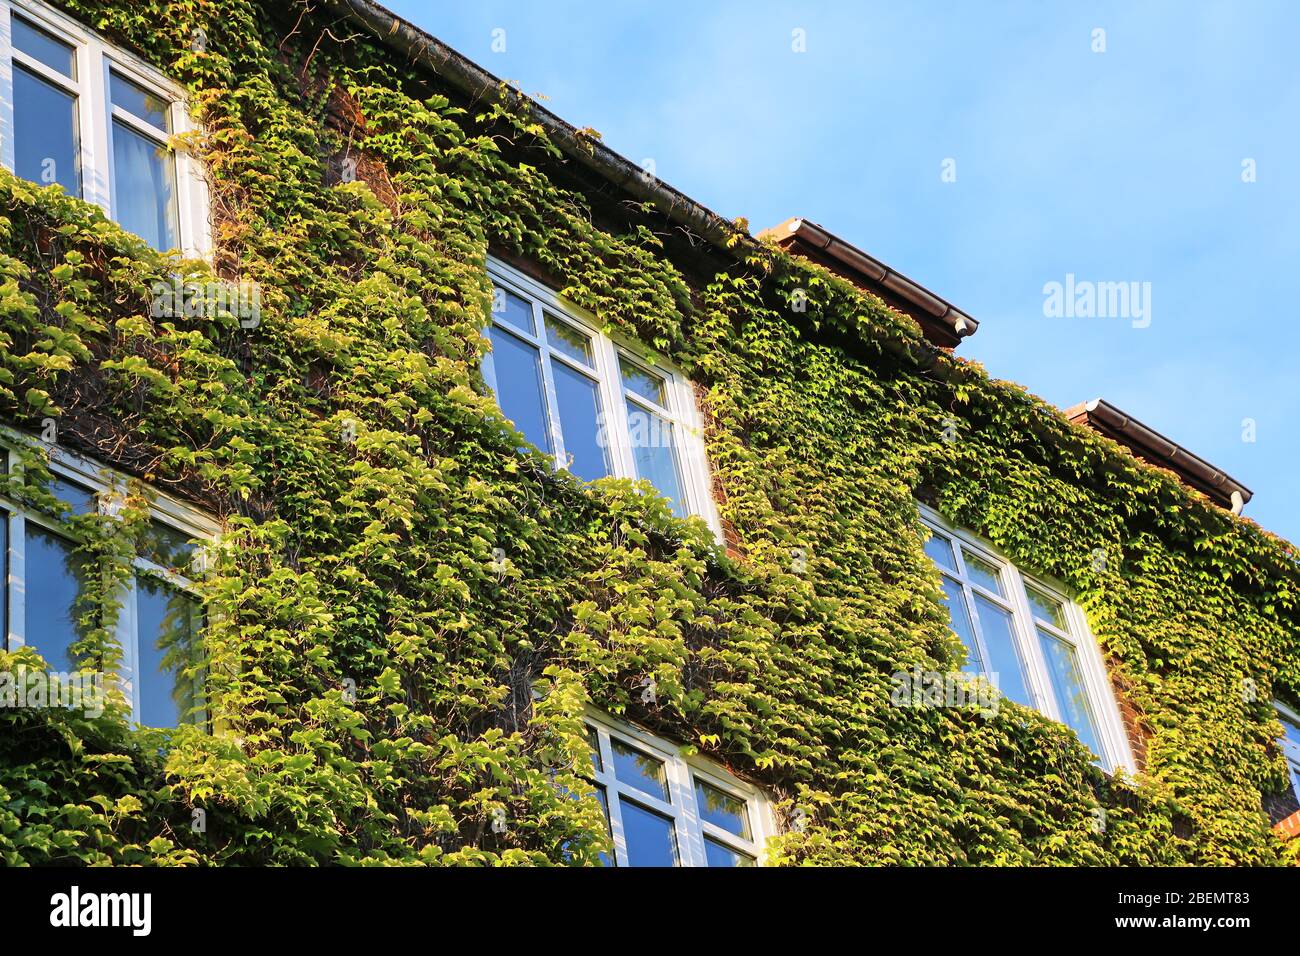 residential building with green facade Stock Photo